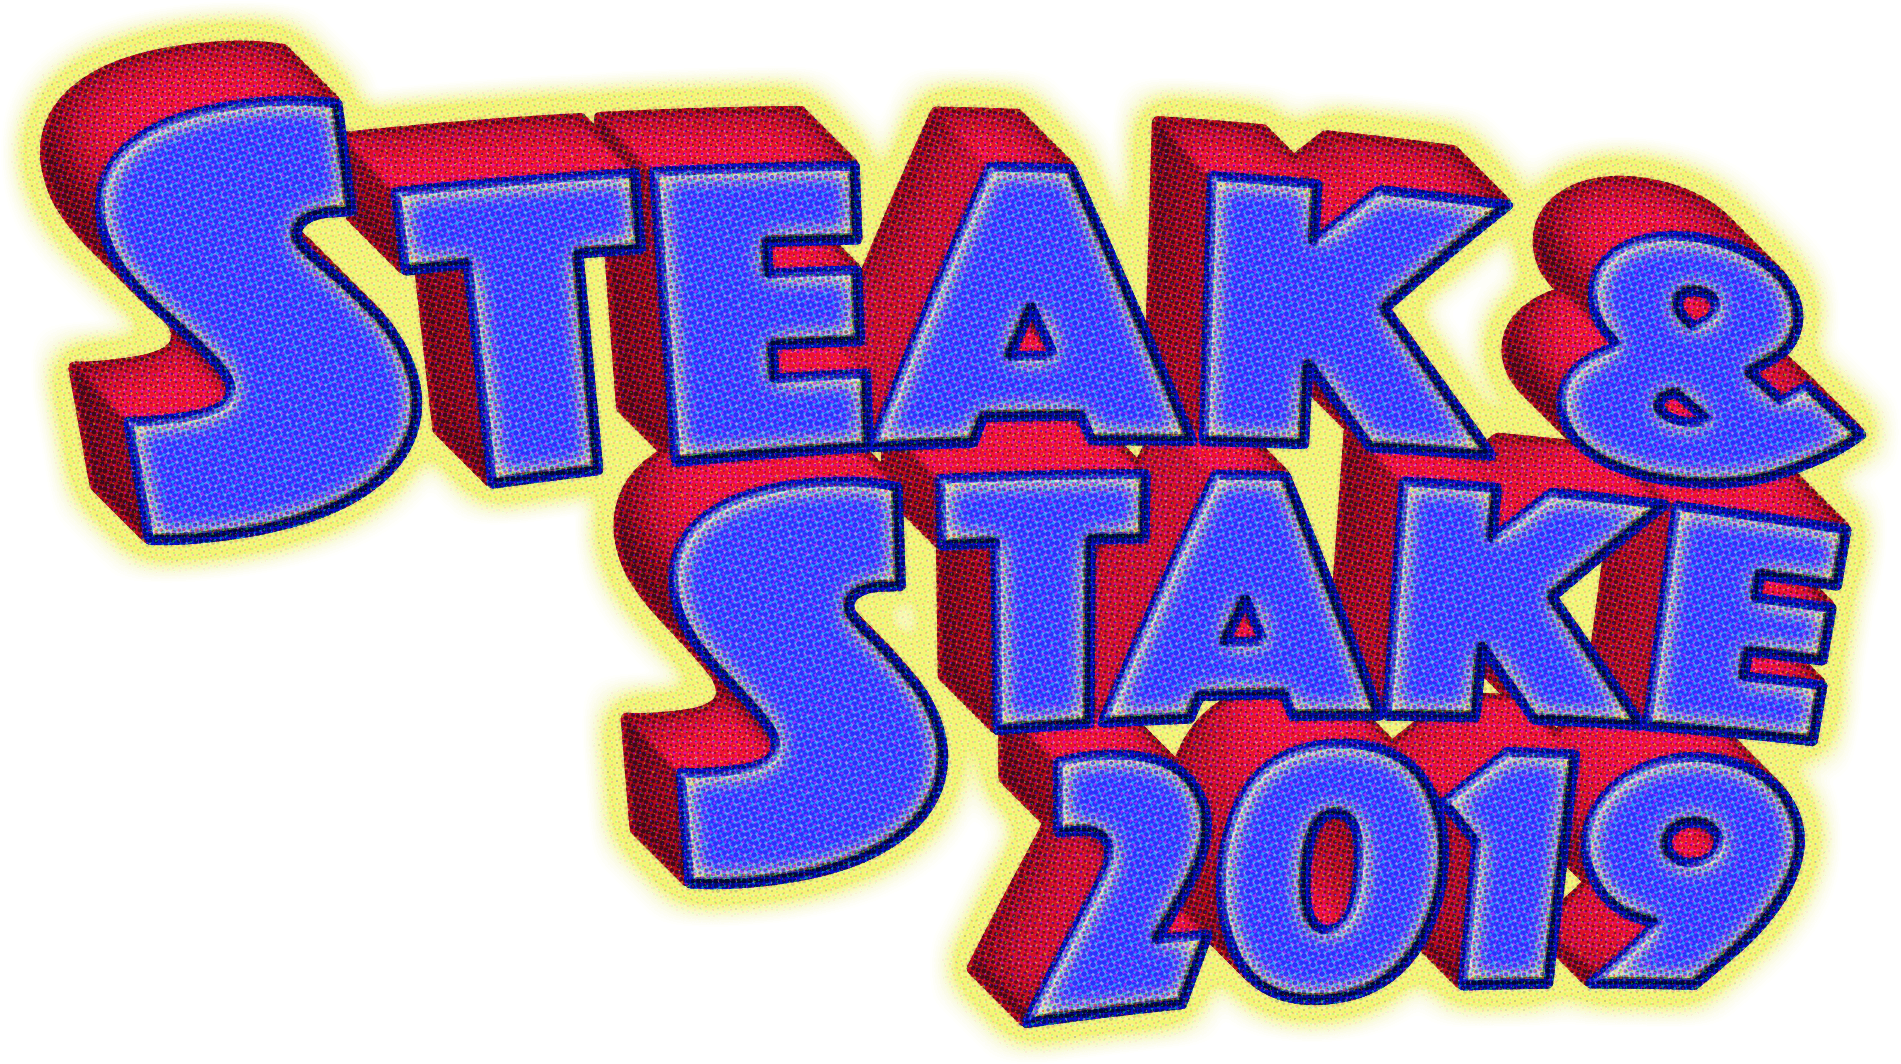 Steak And Stake2019 Event Logo PNG